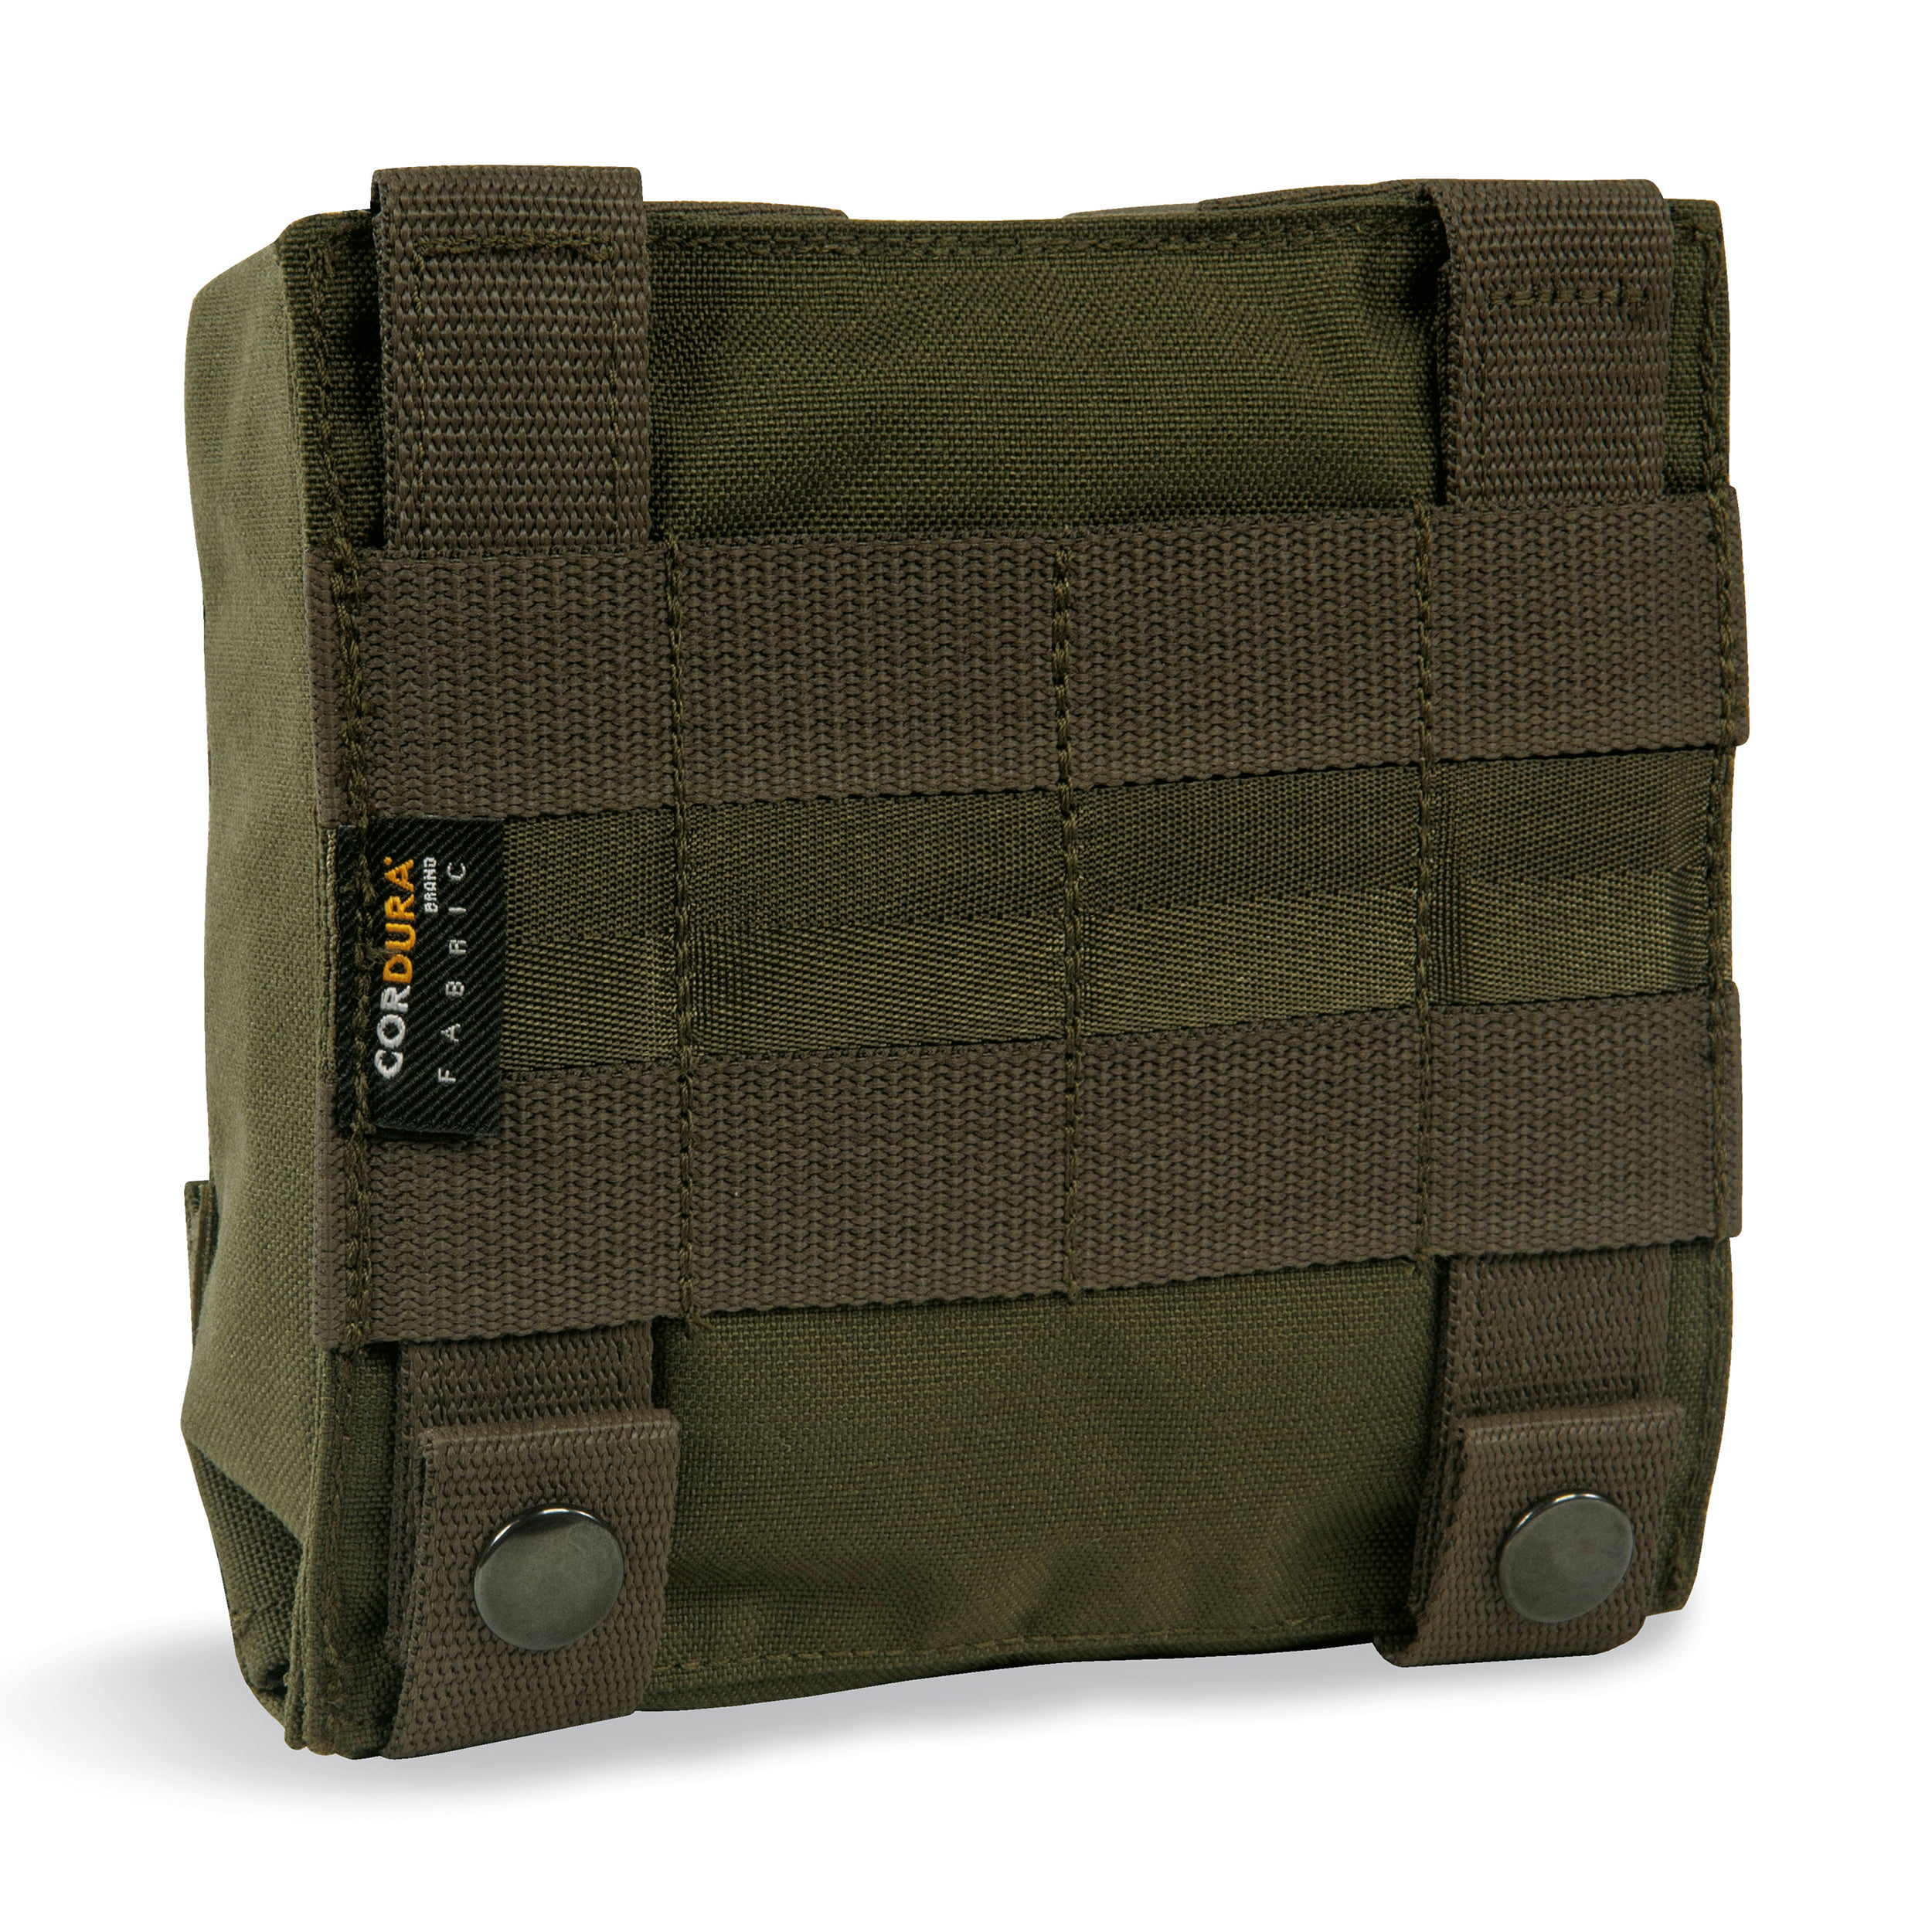 Tasmanian Tiger IFAK Pouch S, Tactical MOLLE Medical Pouch